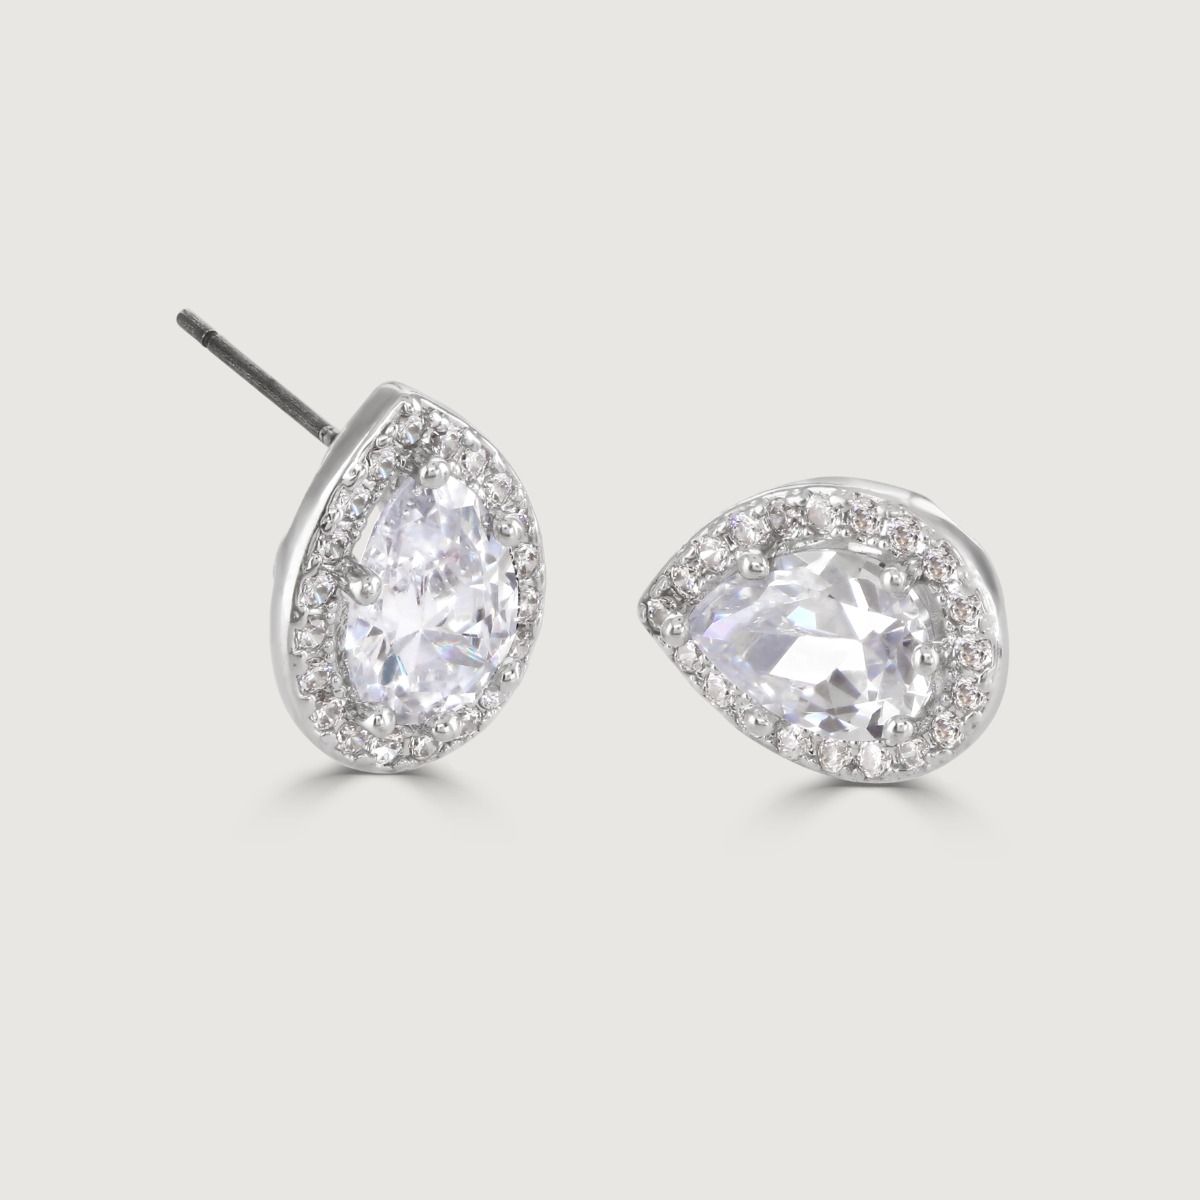 These beautiful stud earrings are set with flawlessly cut cubic zirconia stones, surrounding a dazzling oval cut centre stone. Wear to add timeless glamour to any look.